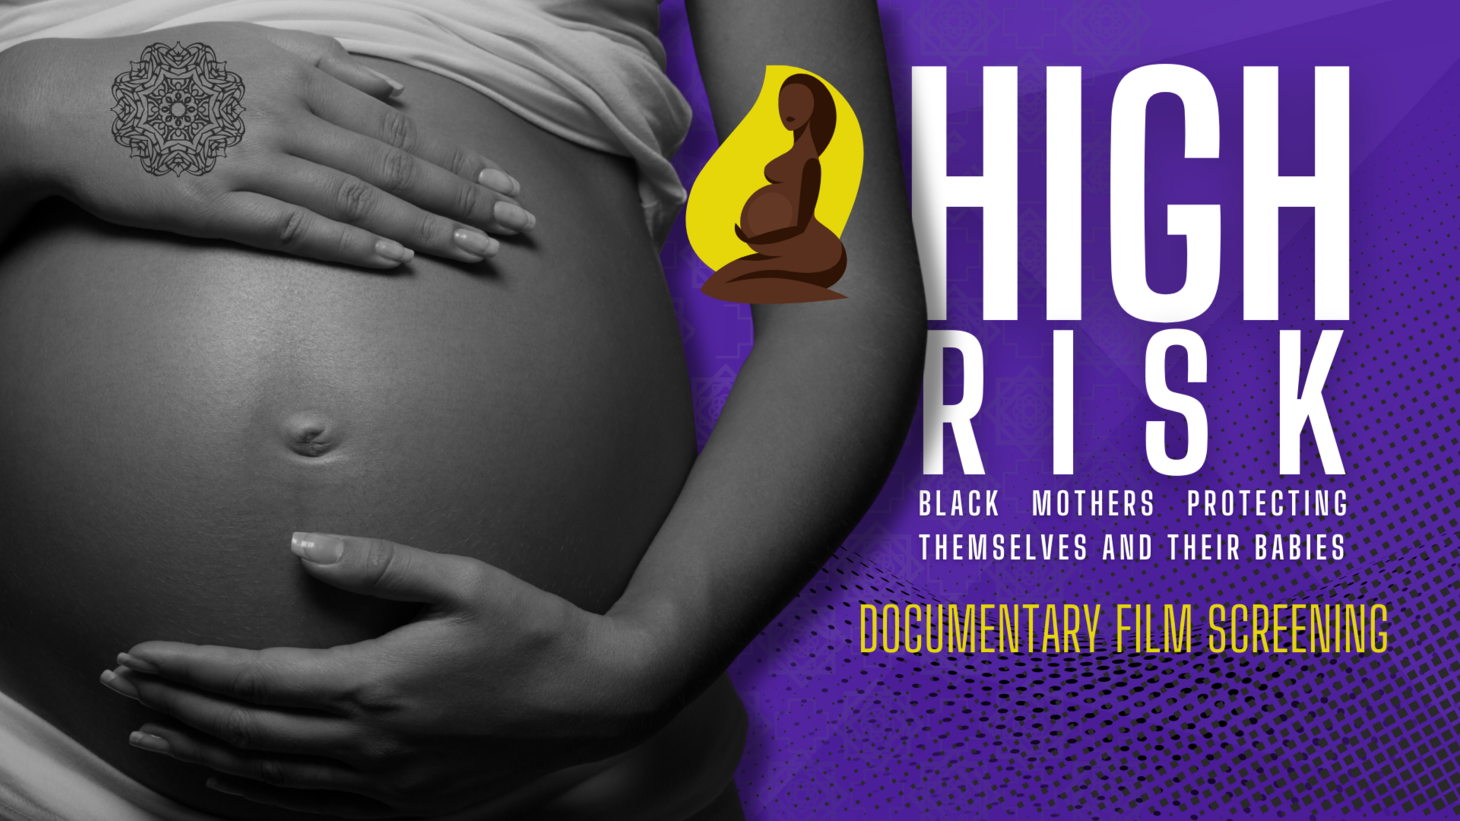 "High Risk" documentary graphic